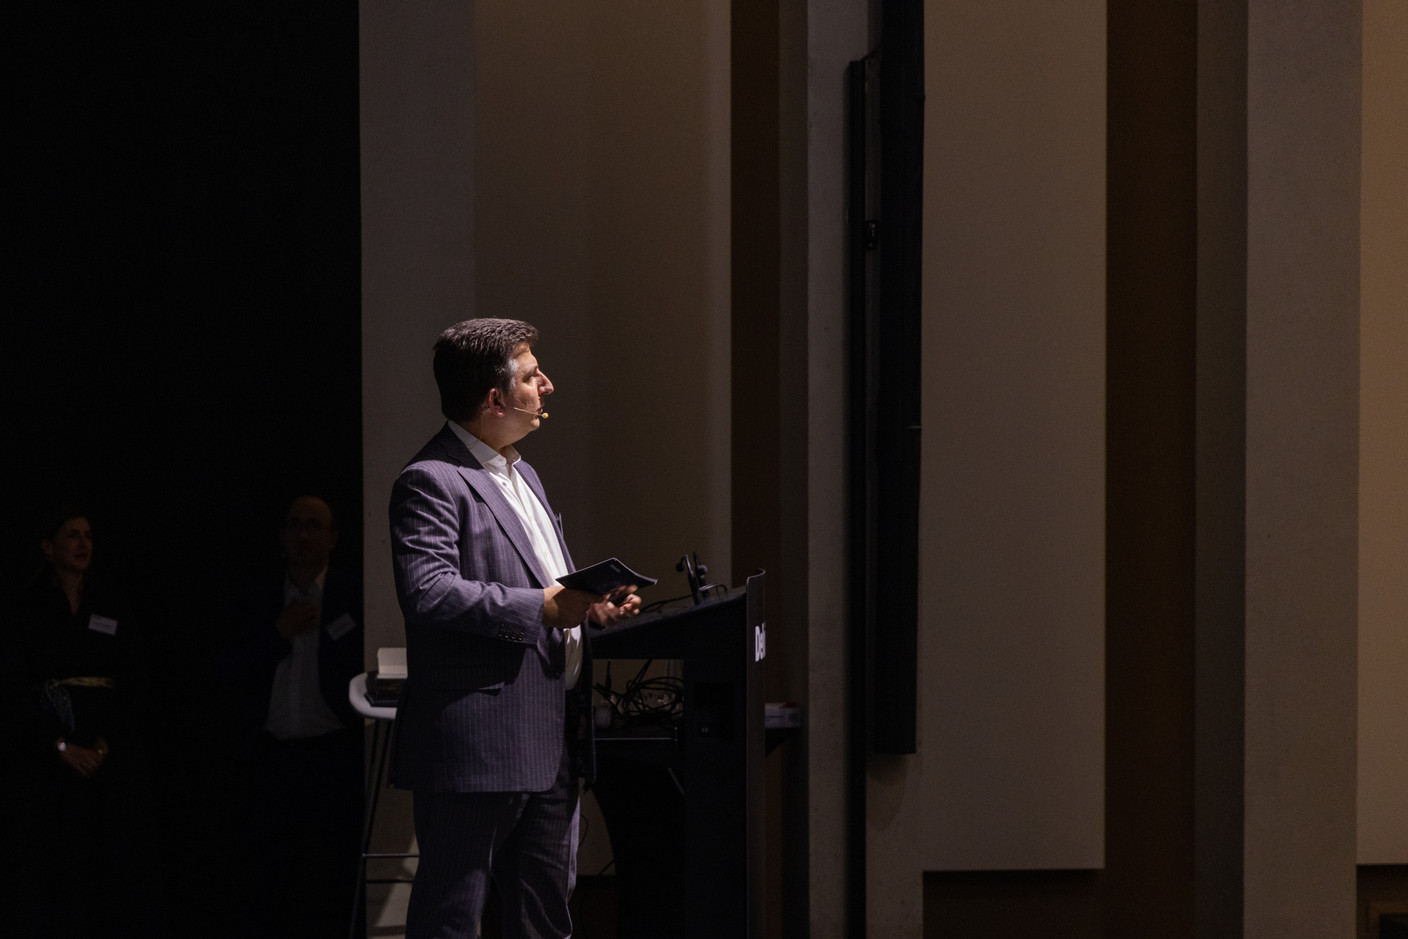 Pascal Martino, banking leader and partner, gave the opening speech at Deloitte Luxembourg's Banking 360 conference on 24 January 2023. Romain Gamba/Maison Moderne